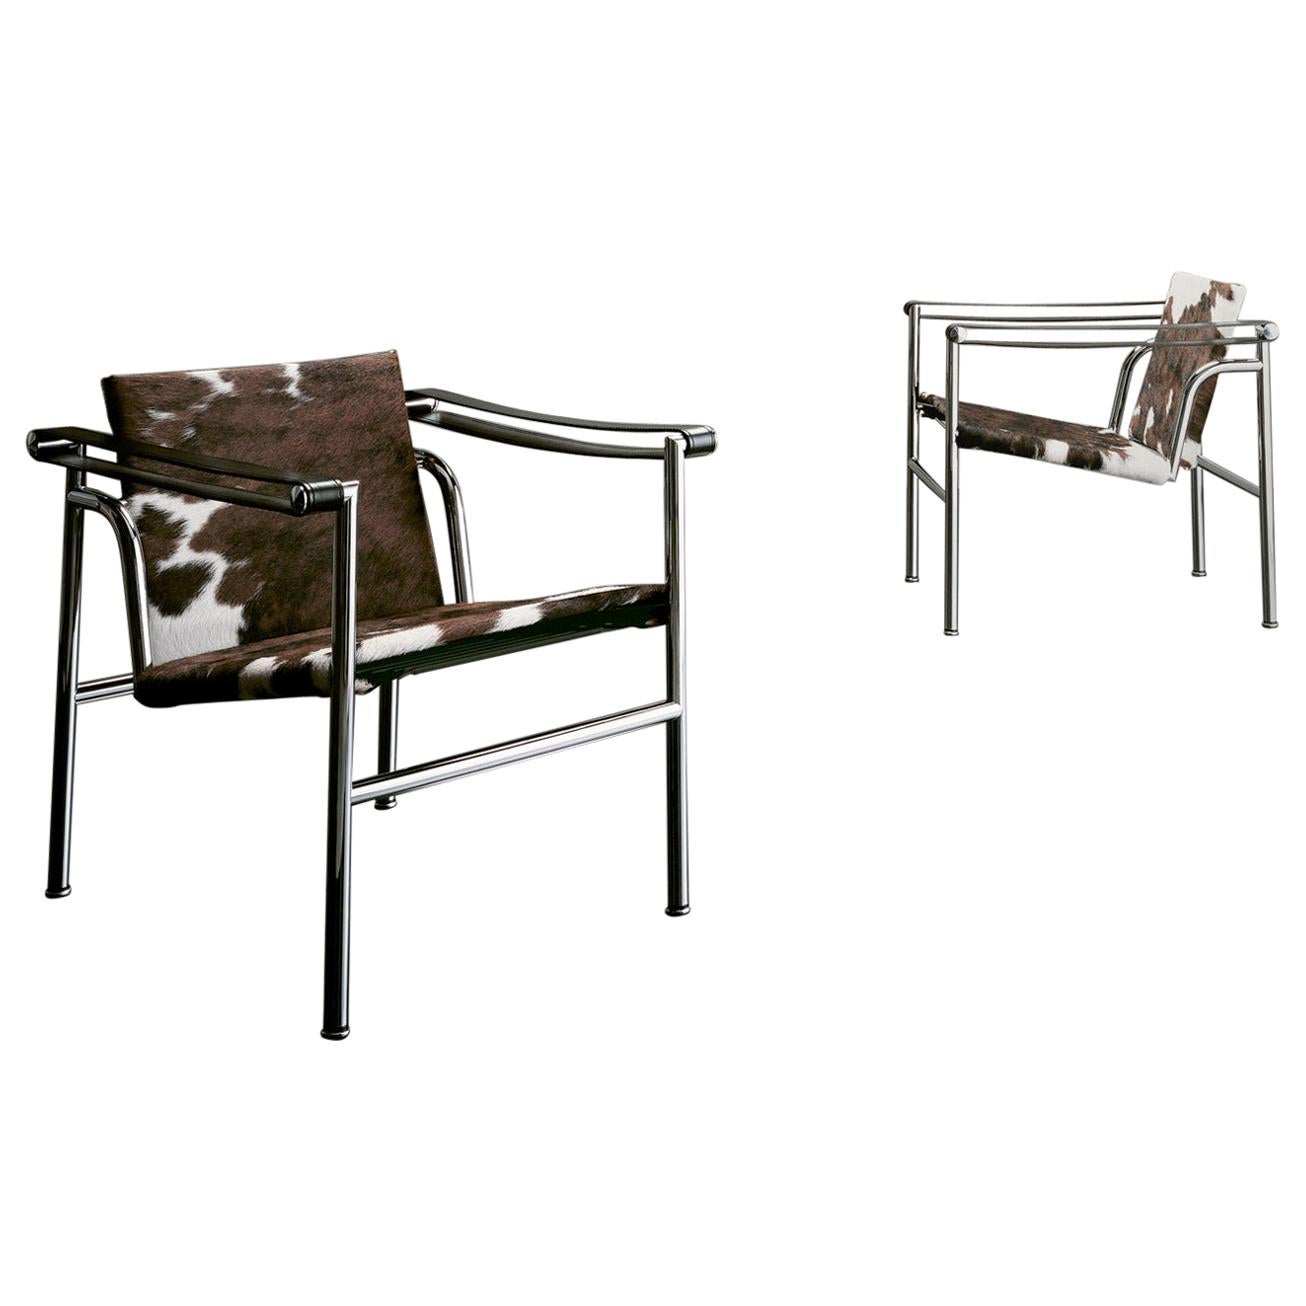 Set of Two LC1 Chairs, Le Corbusier, P.Jeanneret, Charlotte Perriand by Cassina